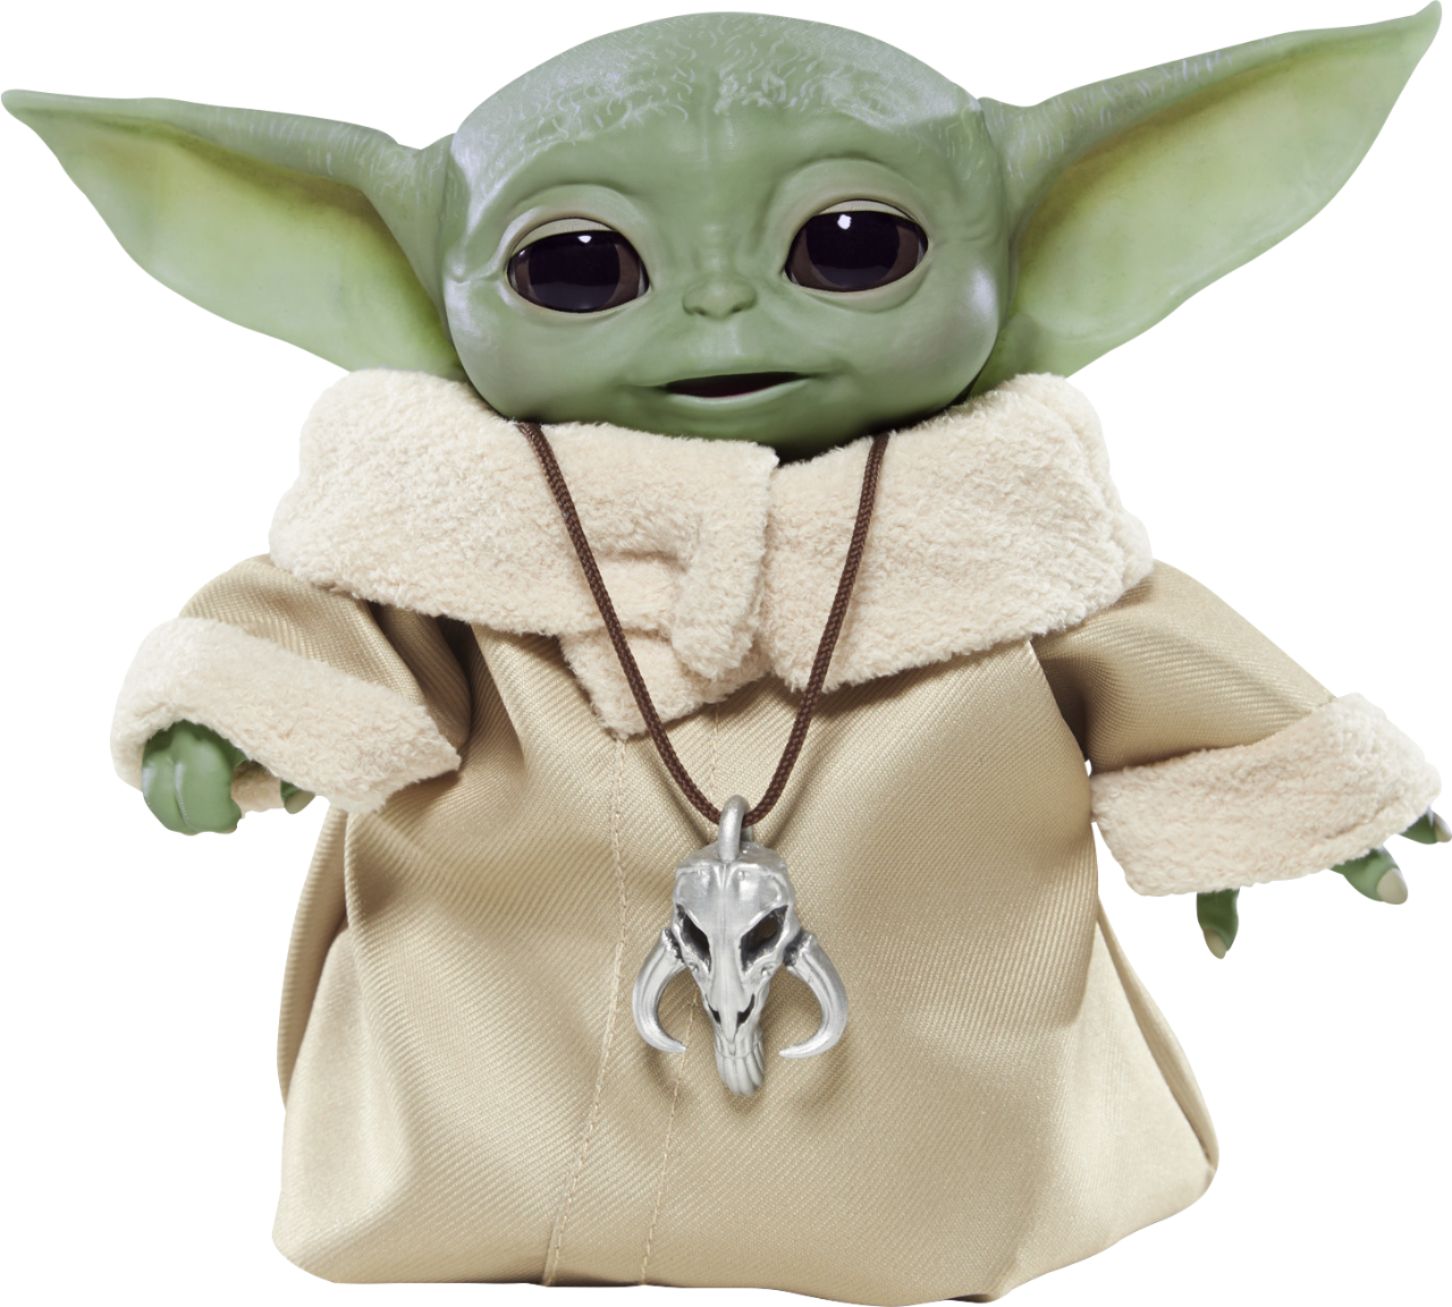 F1119 for sale online Hasbro Star Wars Baby Yoda The Child Animatronic Edition Action Figure 